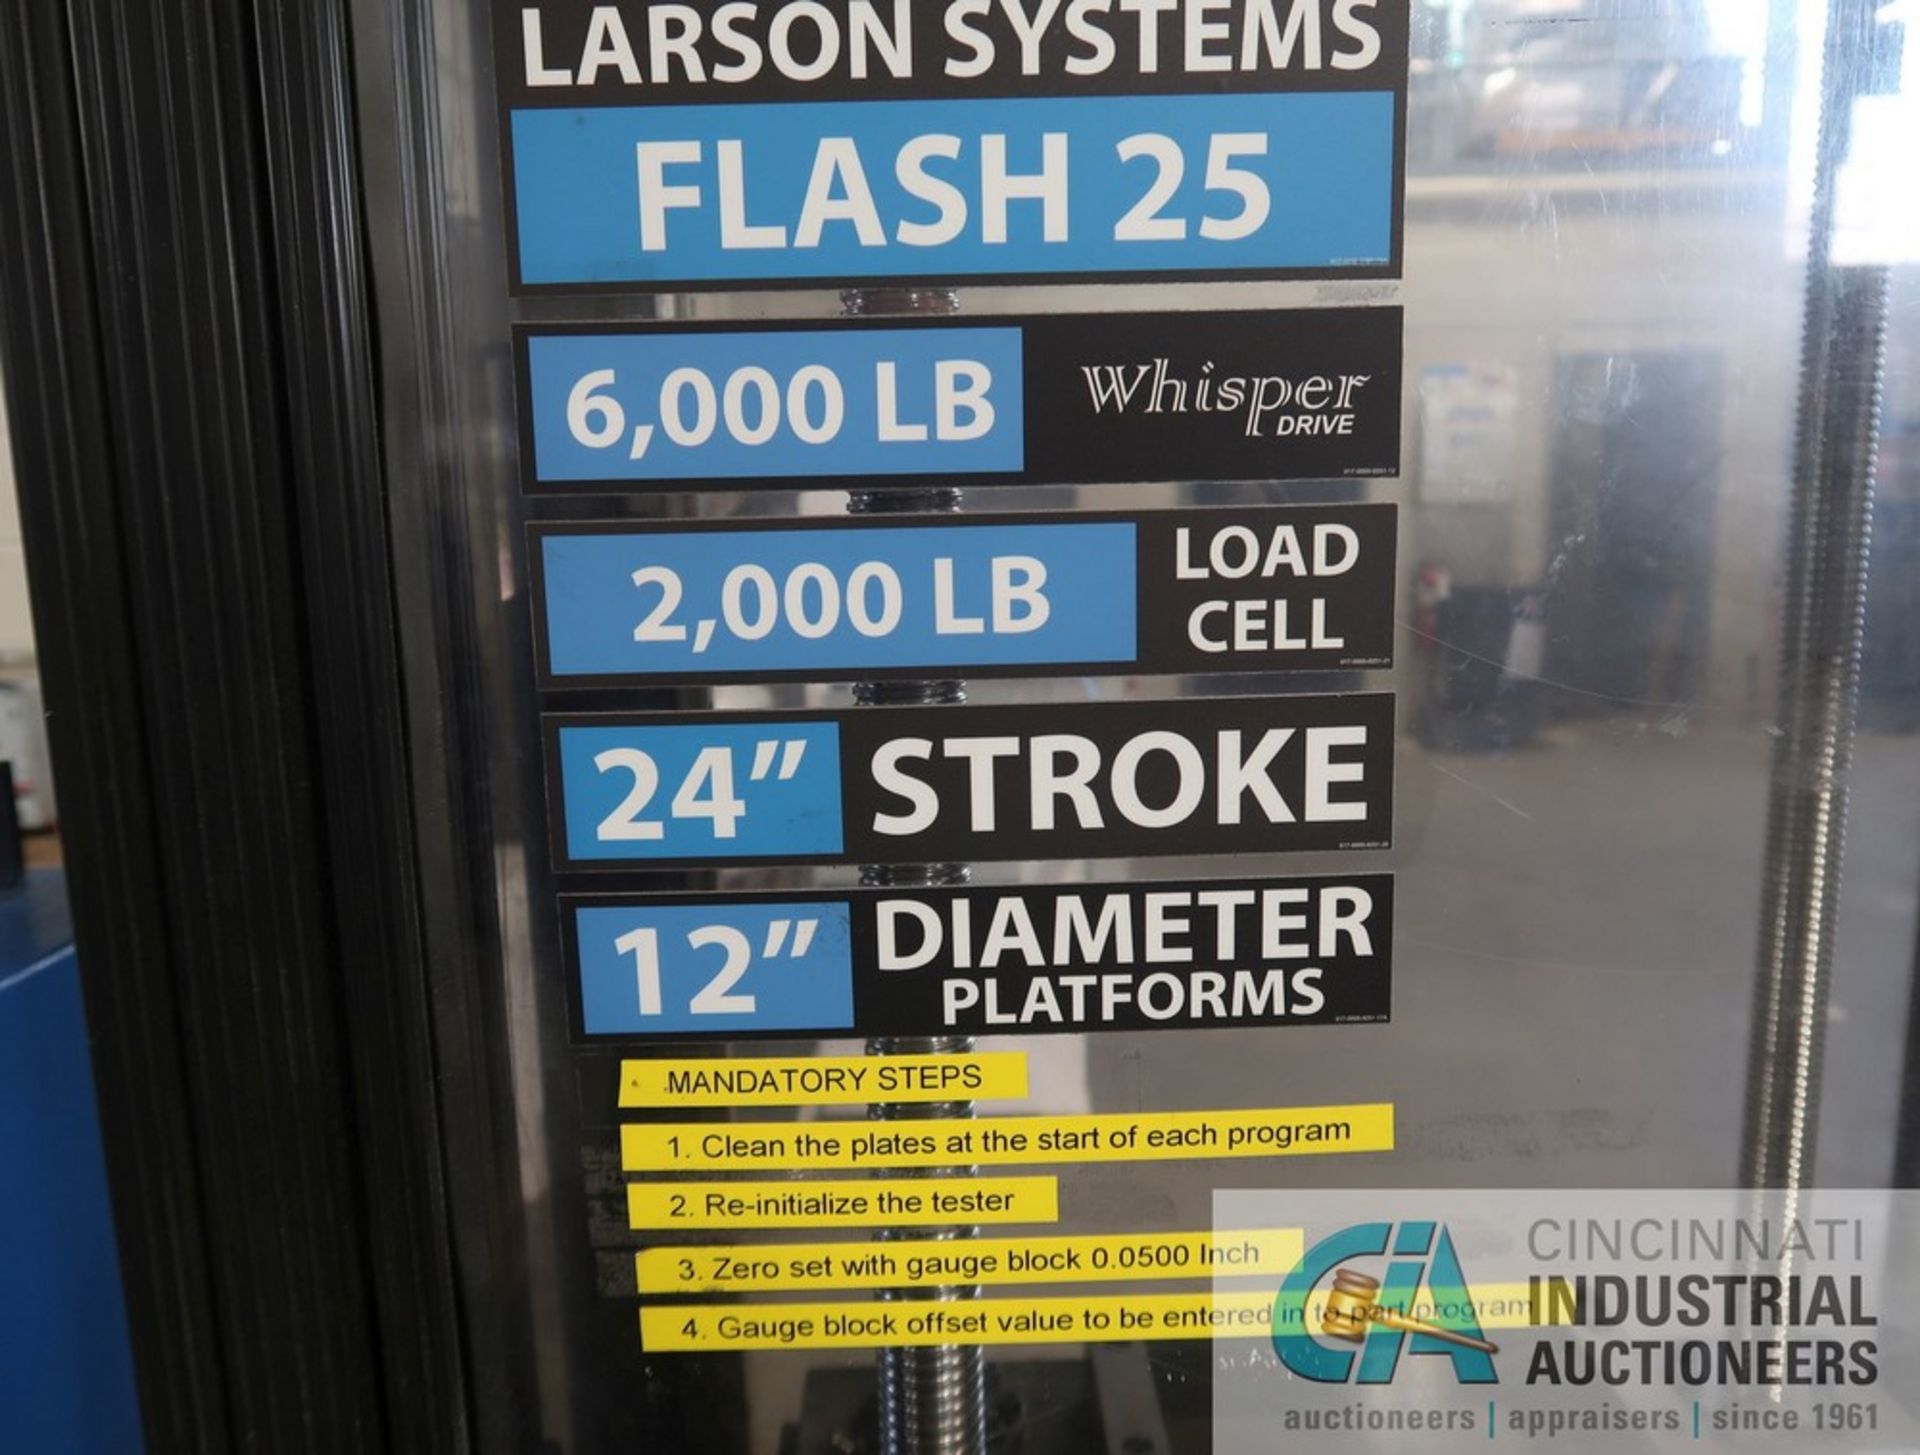 LARSON SYSTEMS MODEL FLASH 25 AUTOMATIC LOAD TESTER; S/N 4865021215, 6,000 LB. WHISPER DRIVE, 2, - Image 6 of 6